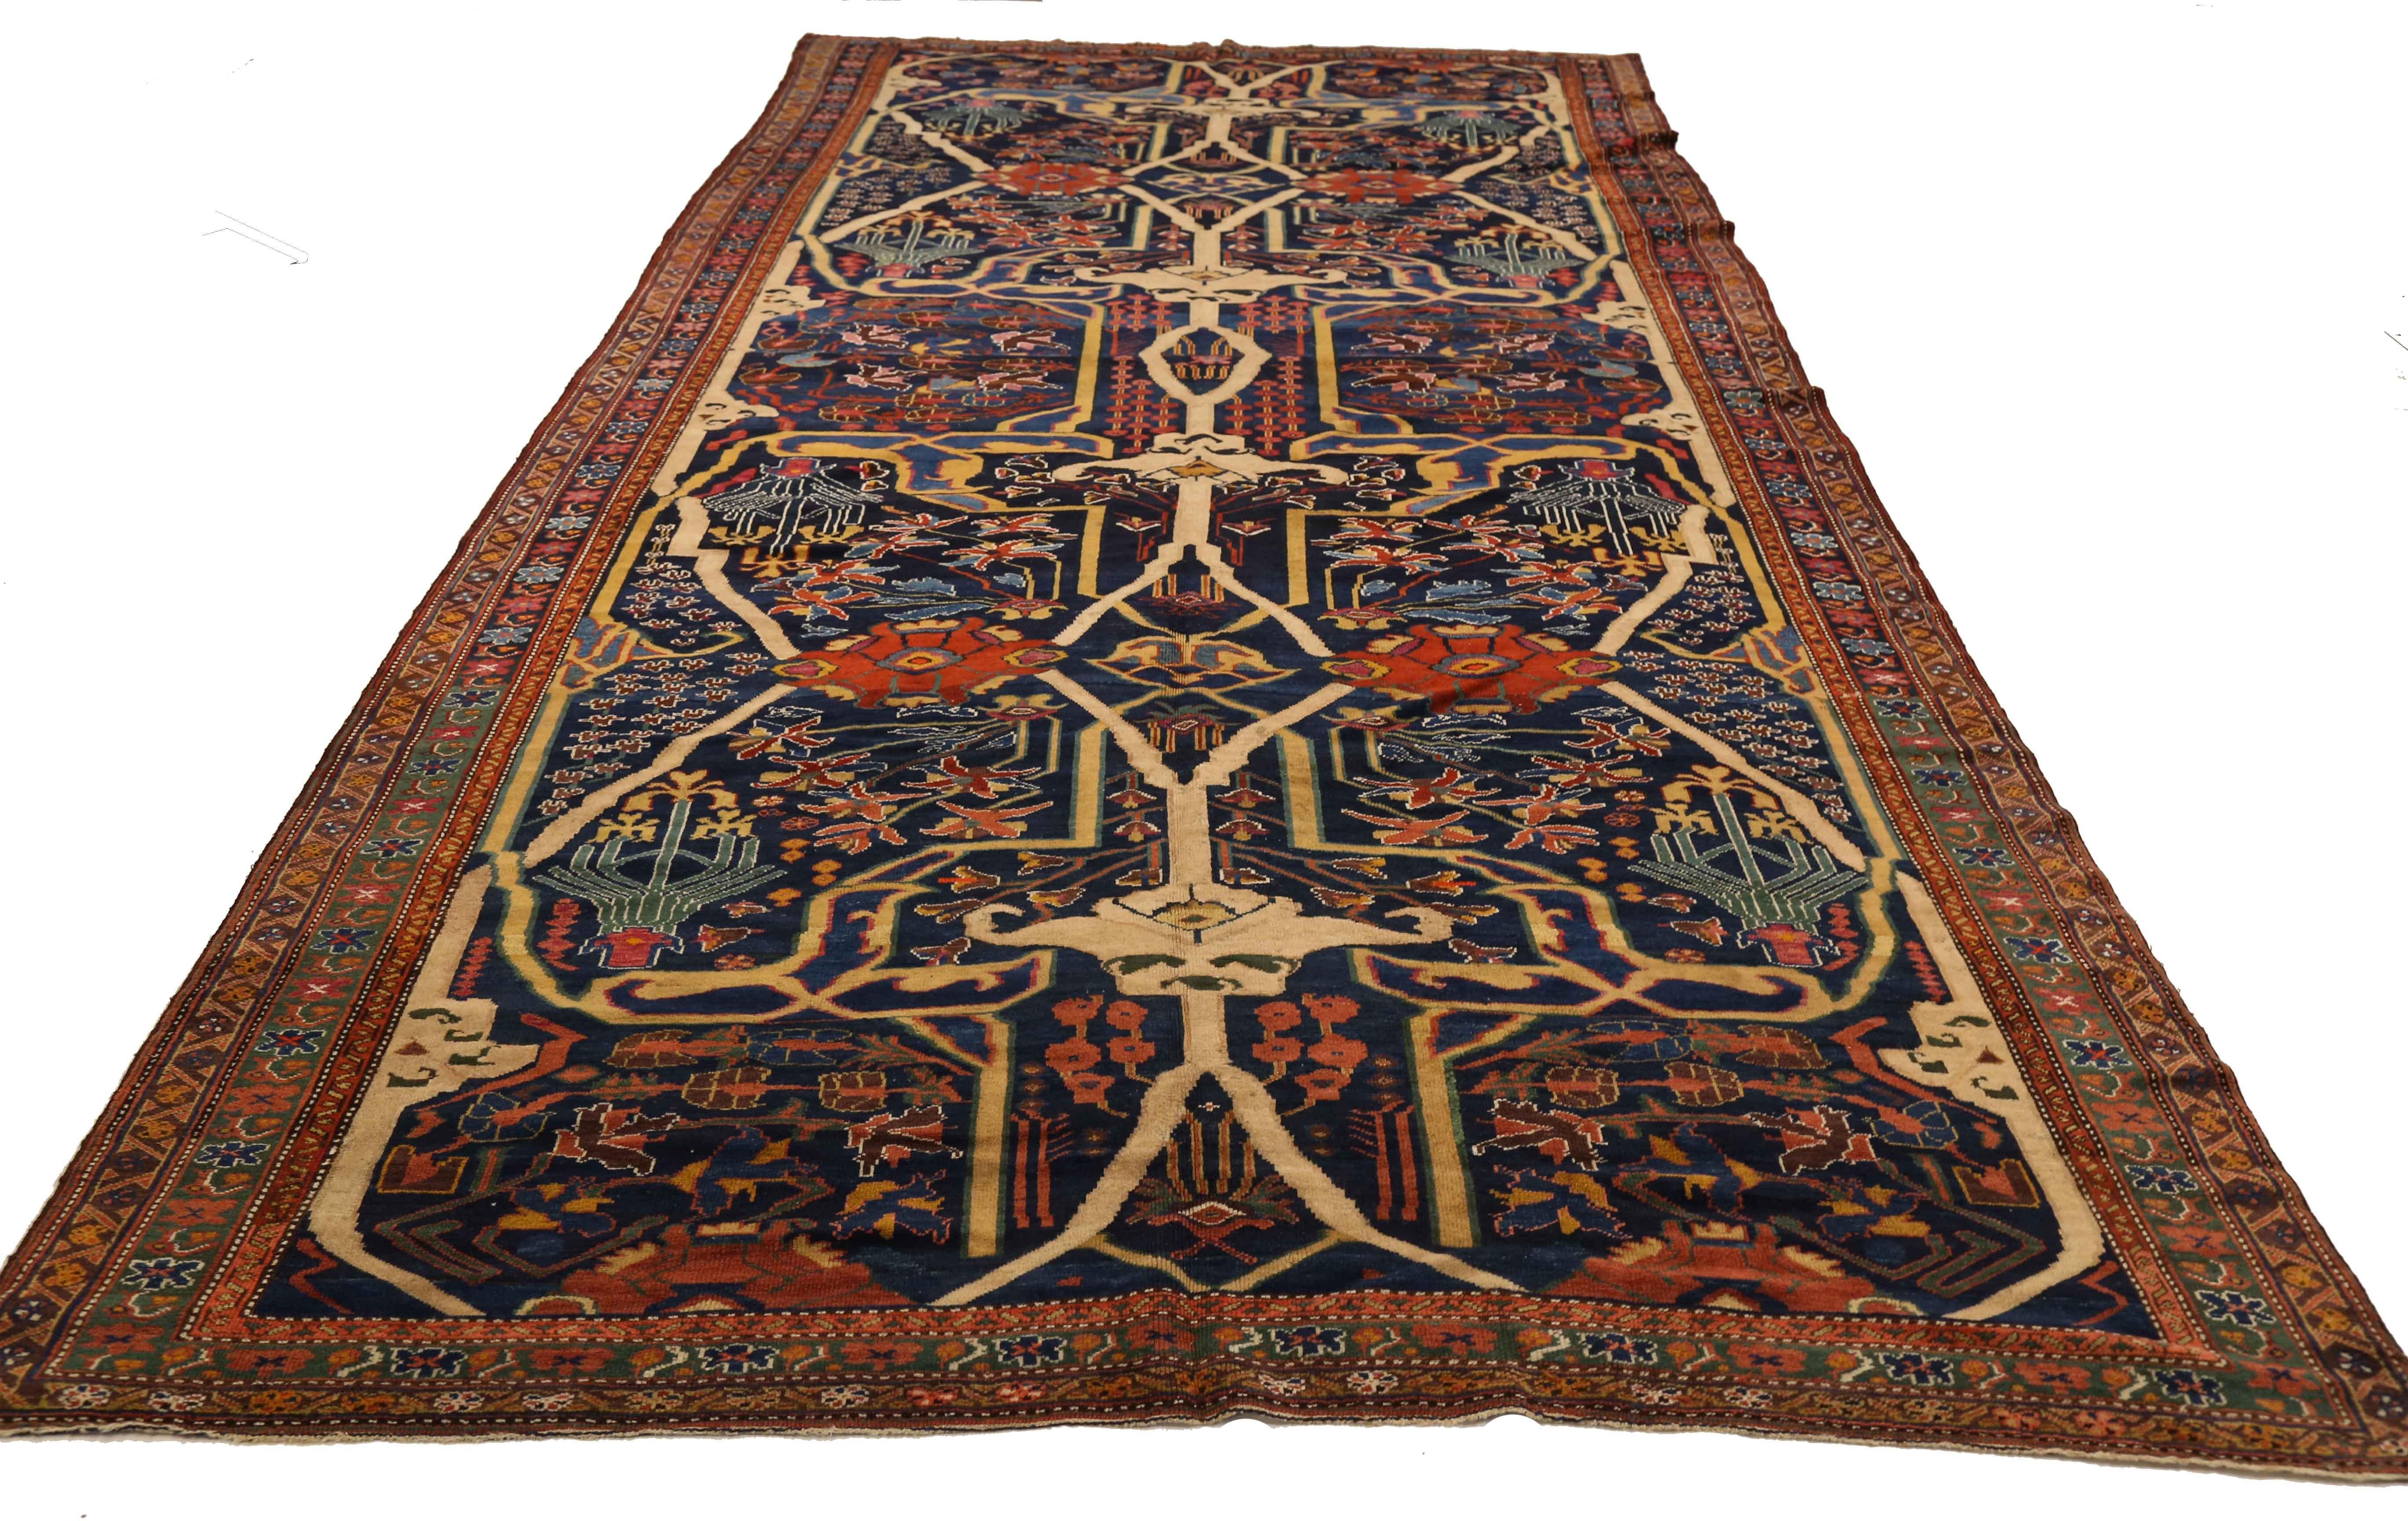 Antique Persian Rug Bijar Design with Multicolored Floral Patterns, circa 1920s In Excellent Condition For Sale In Dallas, TX